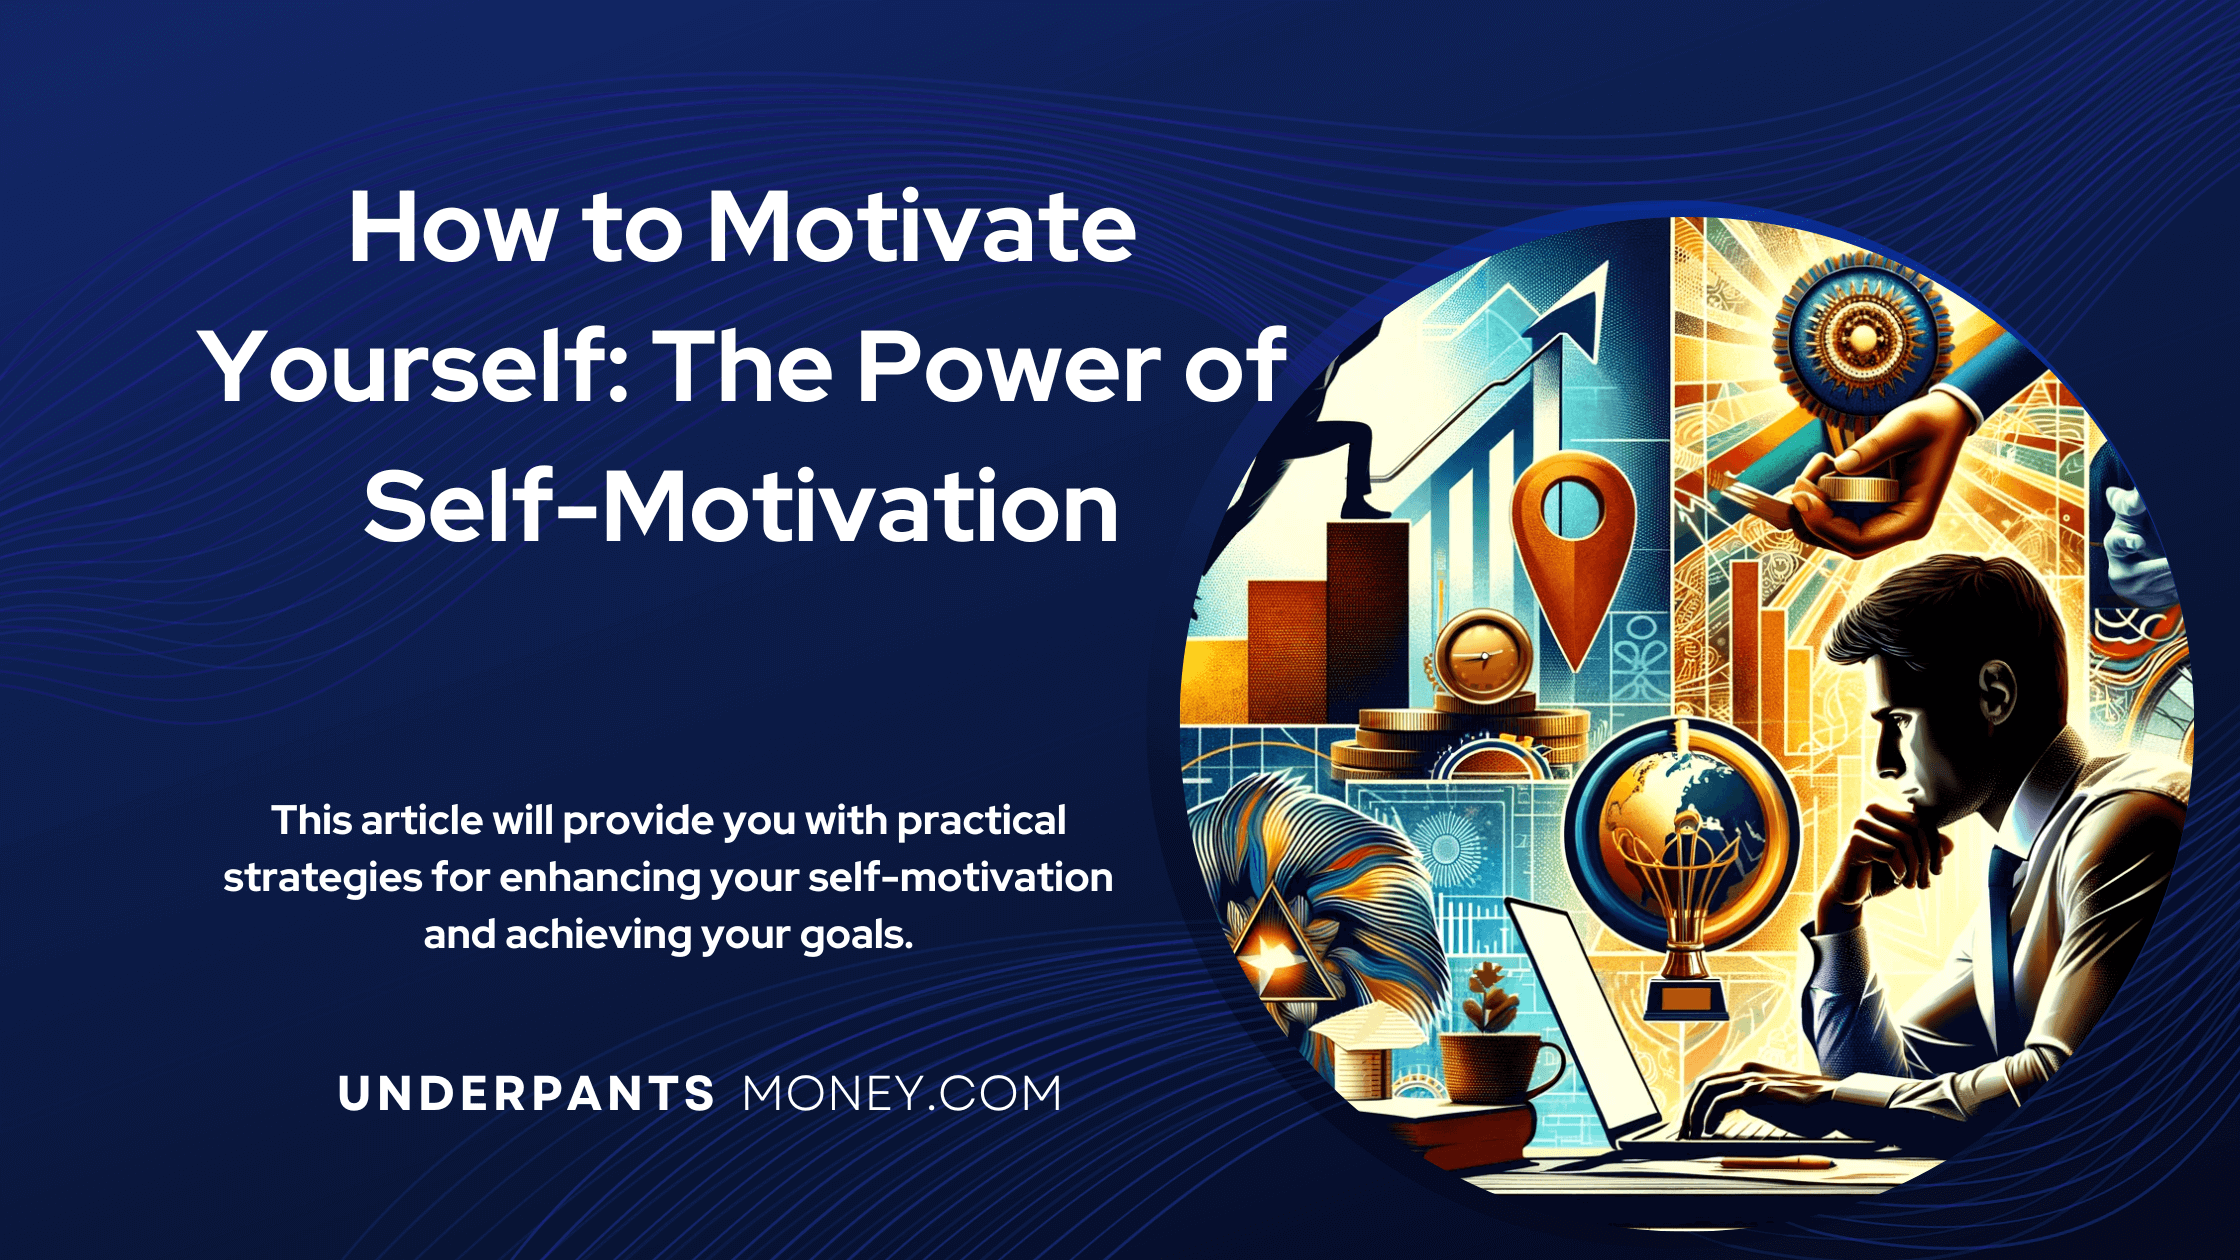 how to motivate yourself title with subtext on blue back ground